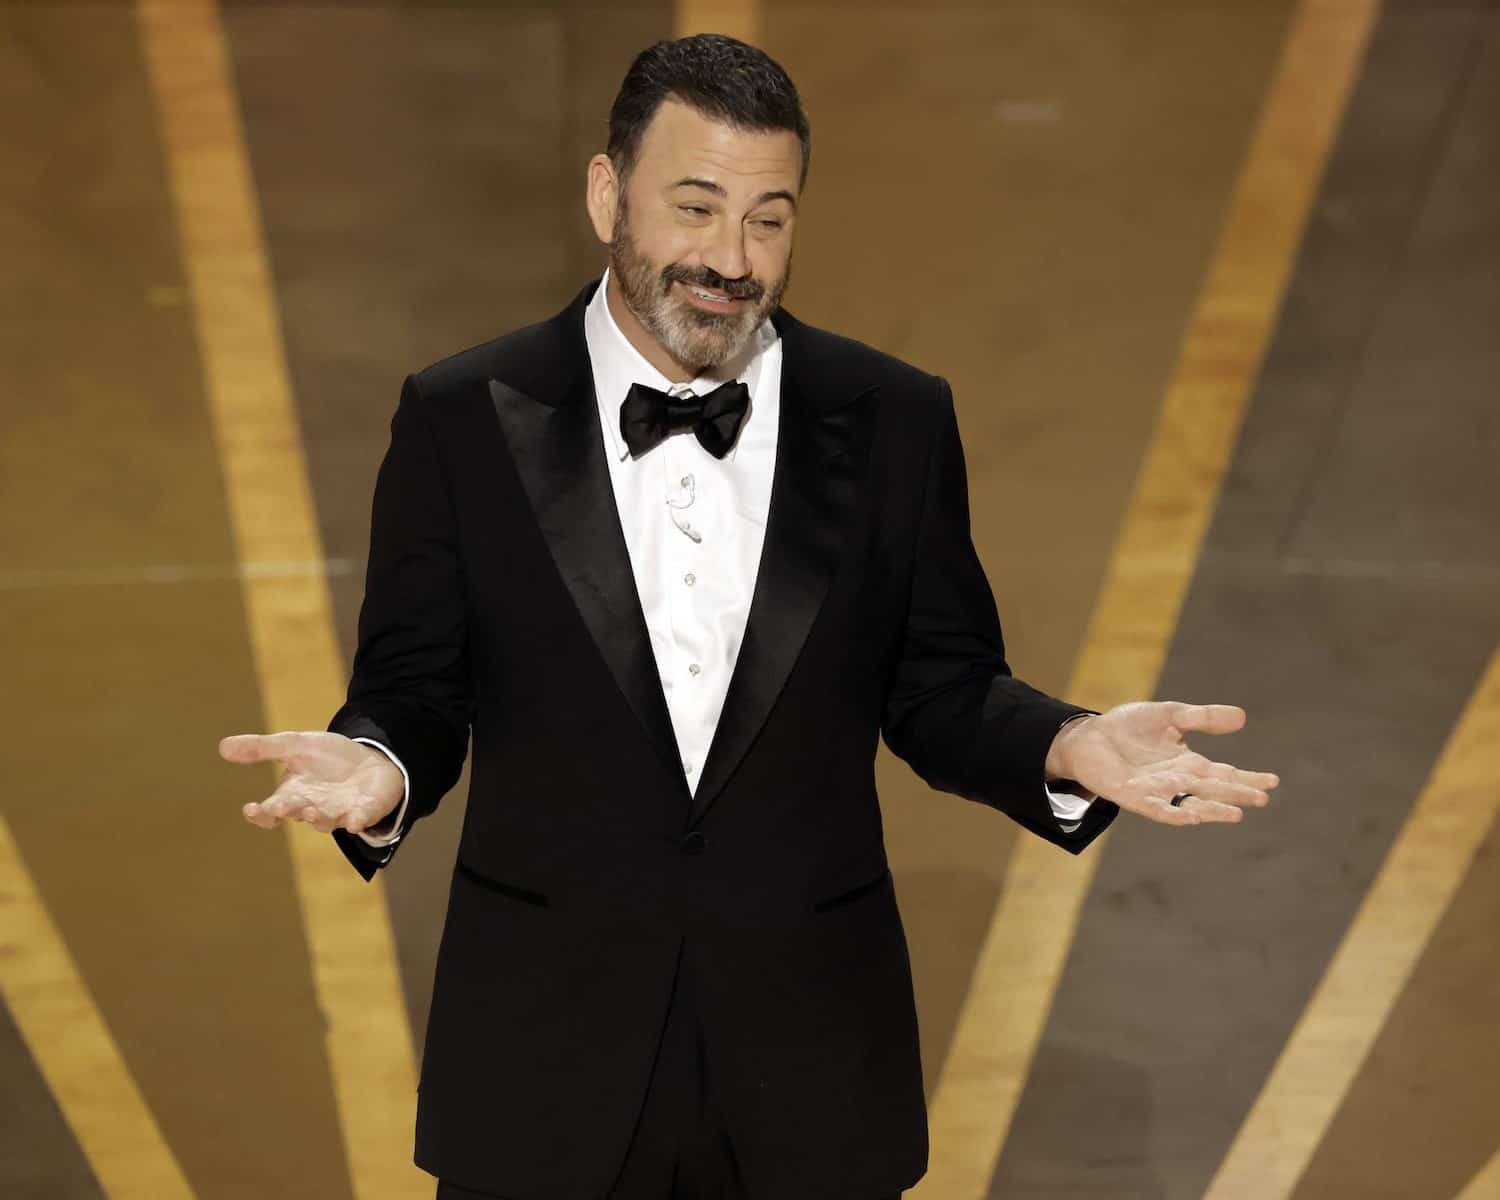 Jimmy Kimmel faced controversy during a "Jimmy Kimmel Live!" segment called "Kids Table" in 2013